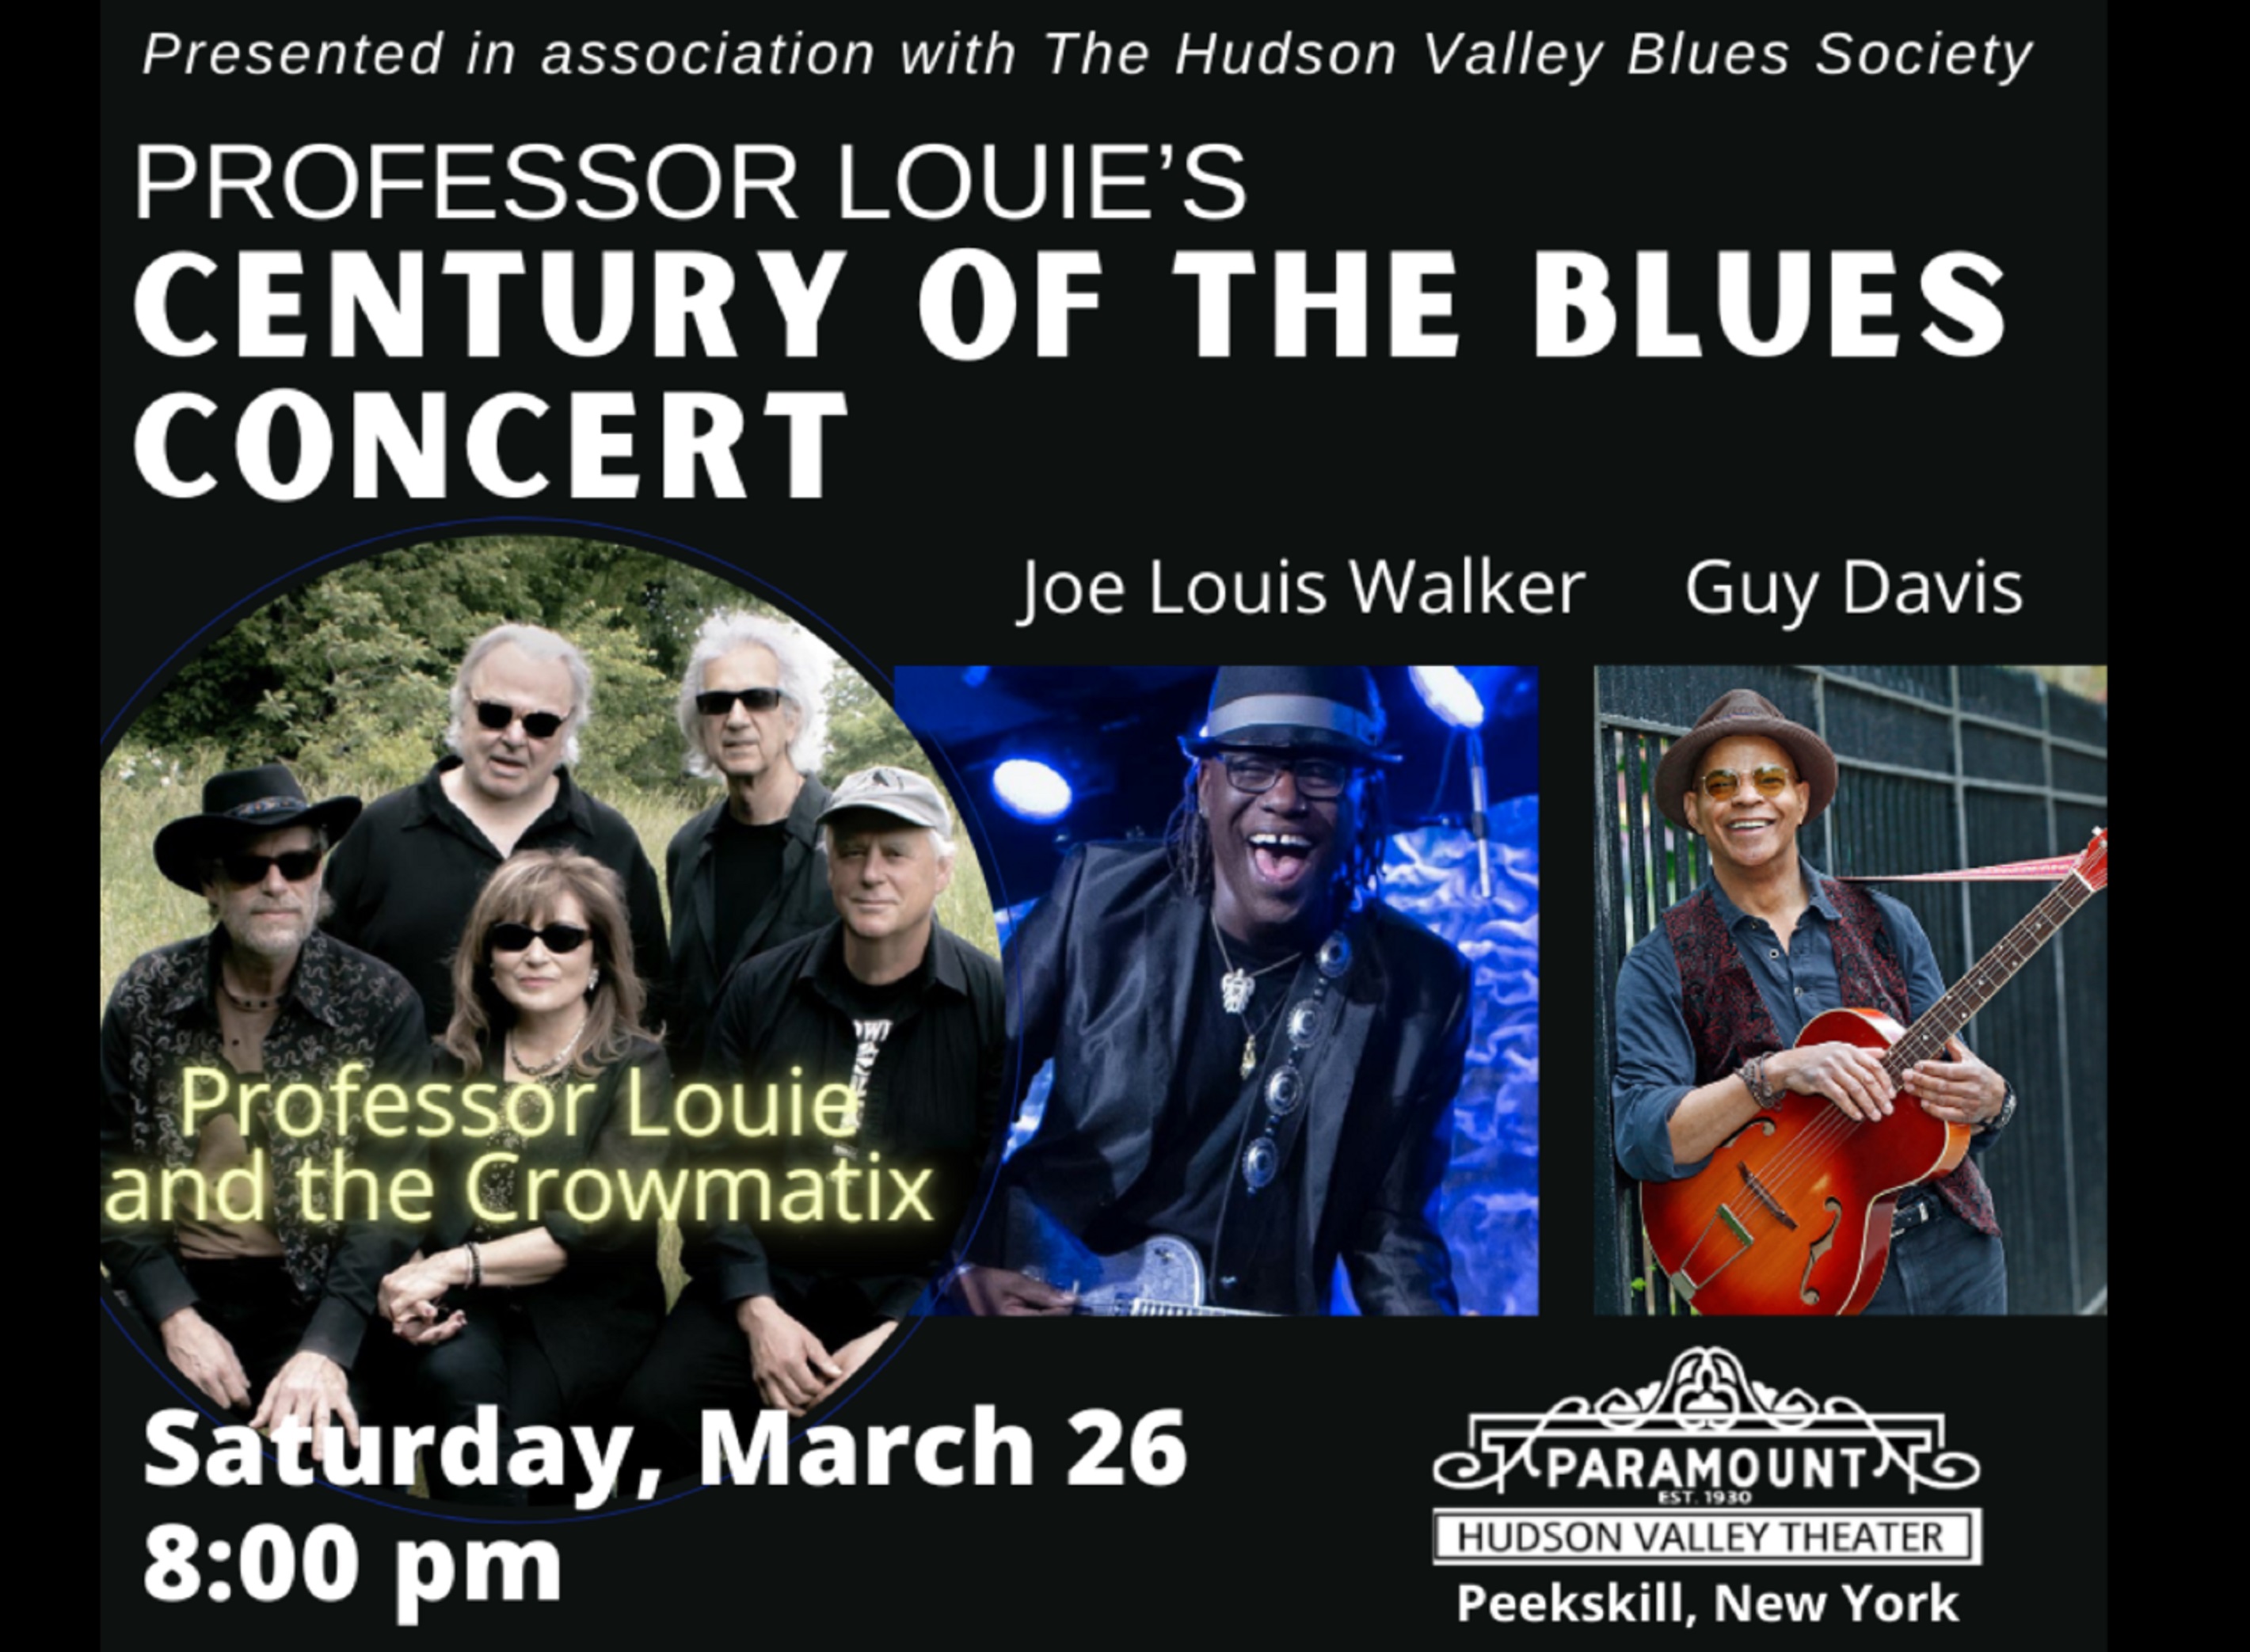 Professor Louie’s Century of The Blues Concert ft. Guy Davis and Joe Louis Walker Saturday, March 26th 8:00 PM Paramount Hudson Valley